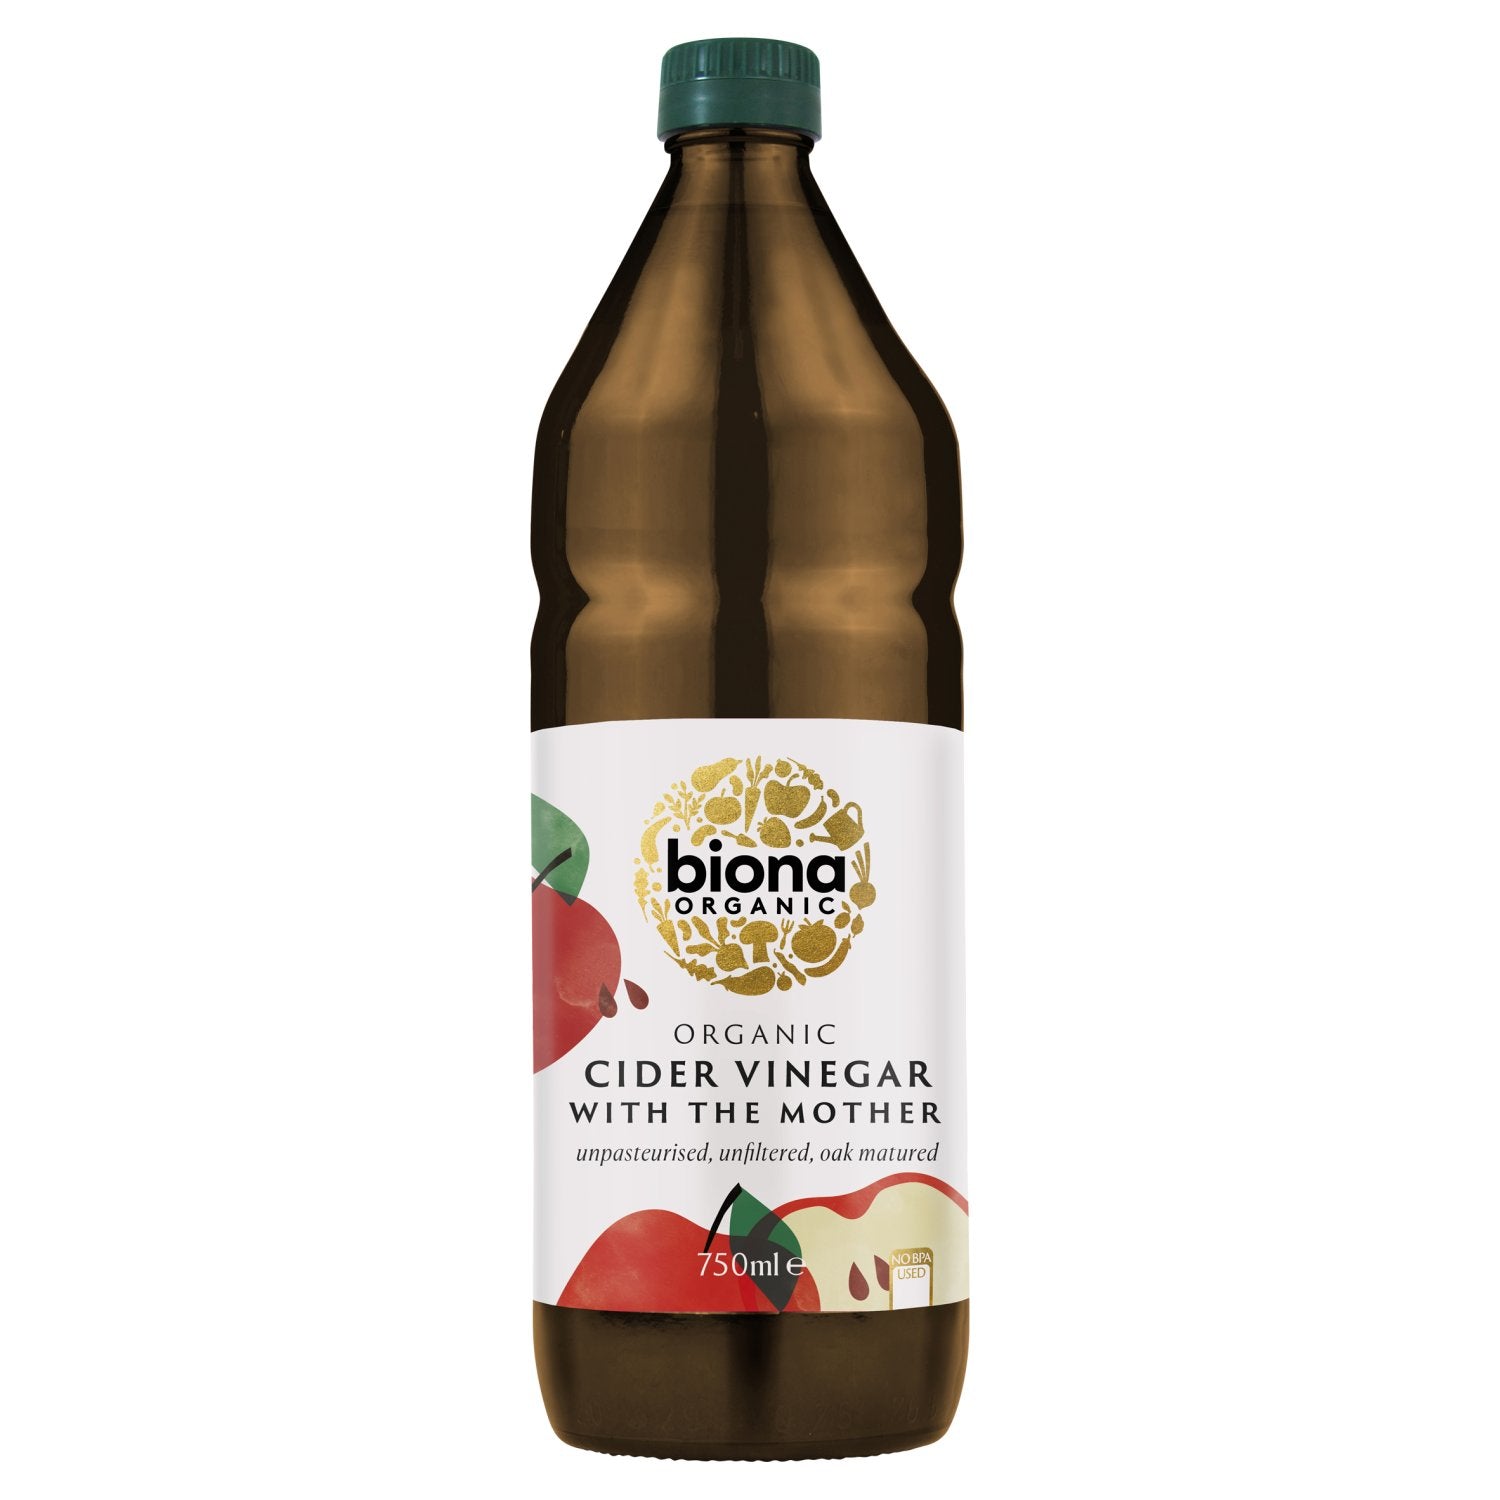 Biona Cider Vinegar with the Mother Organic 750ml